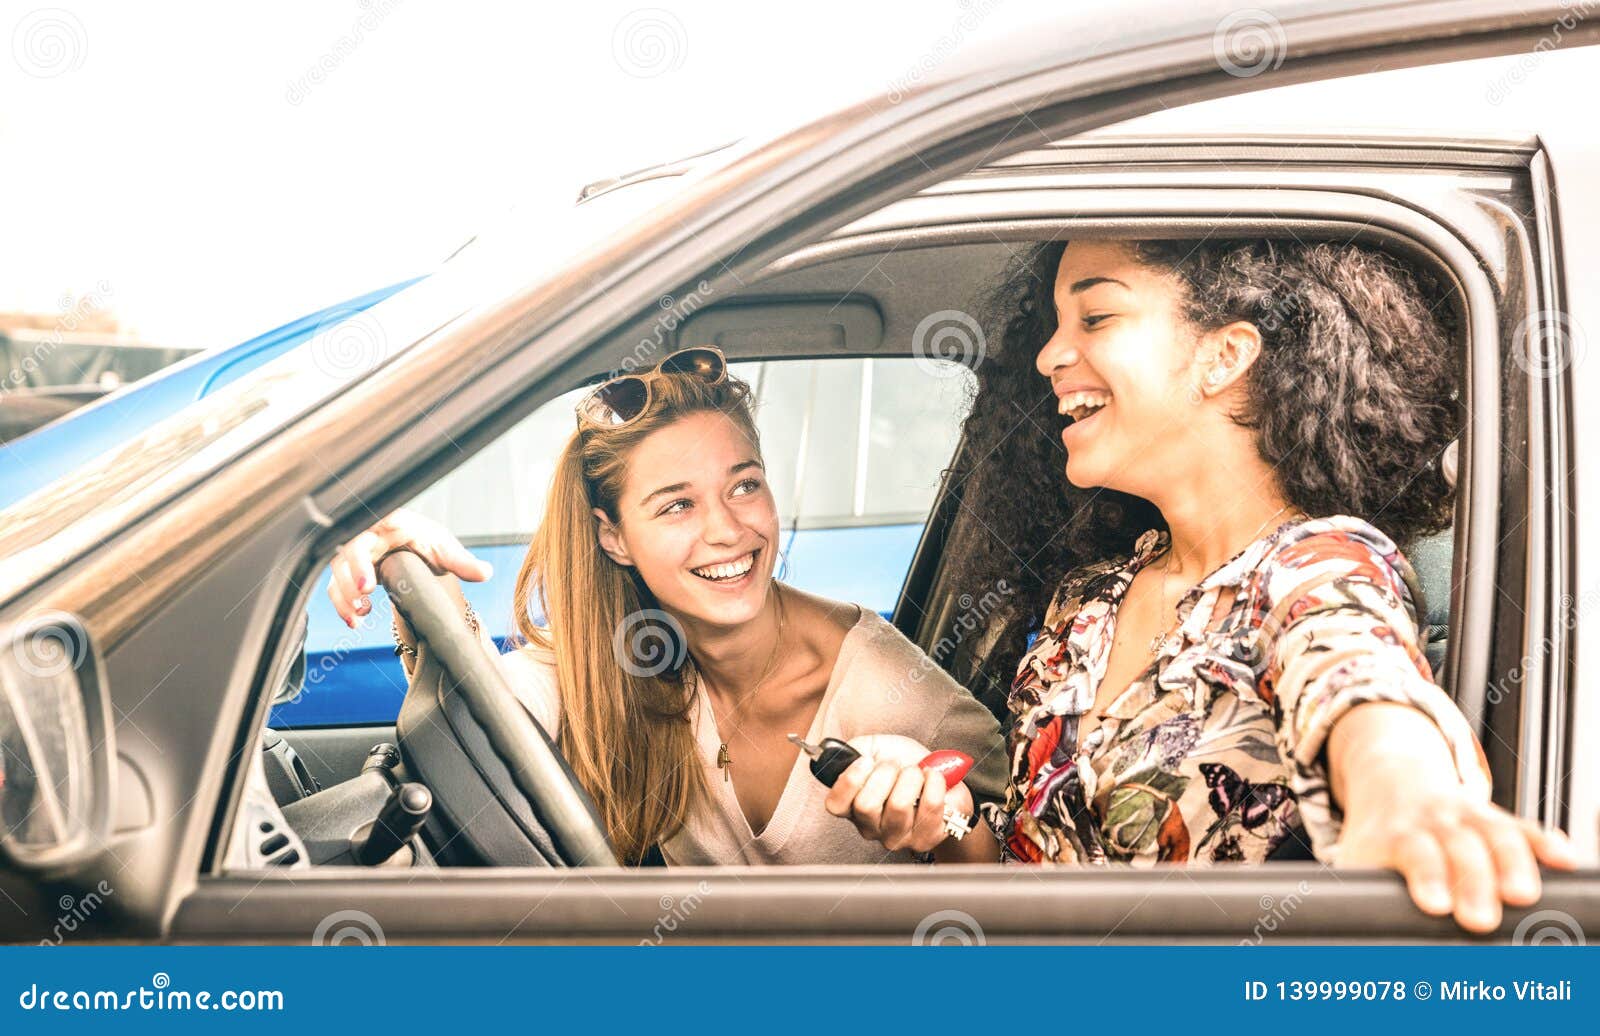 young female best friends having fun at car roadtrip moment - transportation concept and urban ordinary life